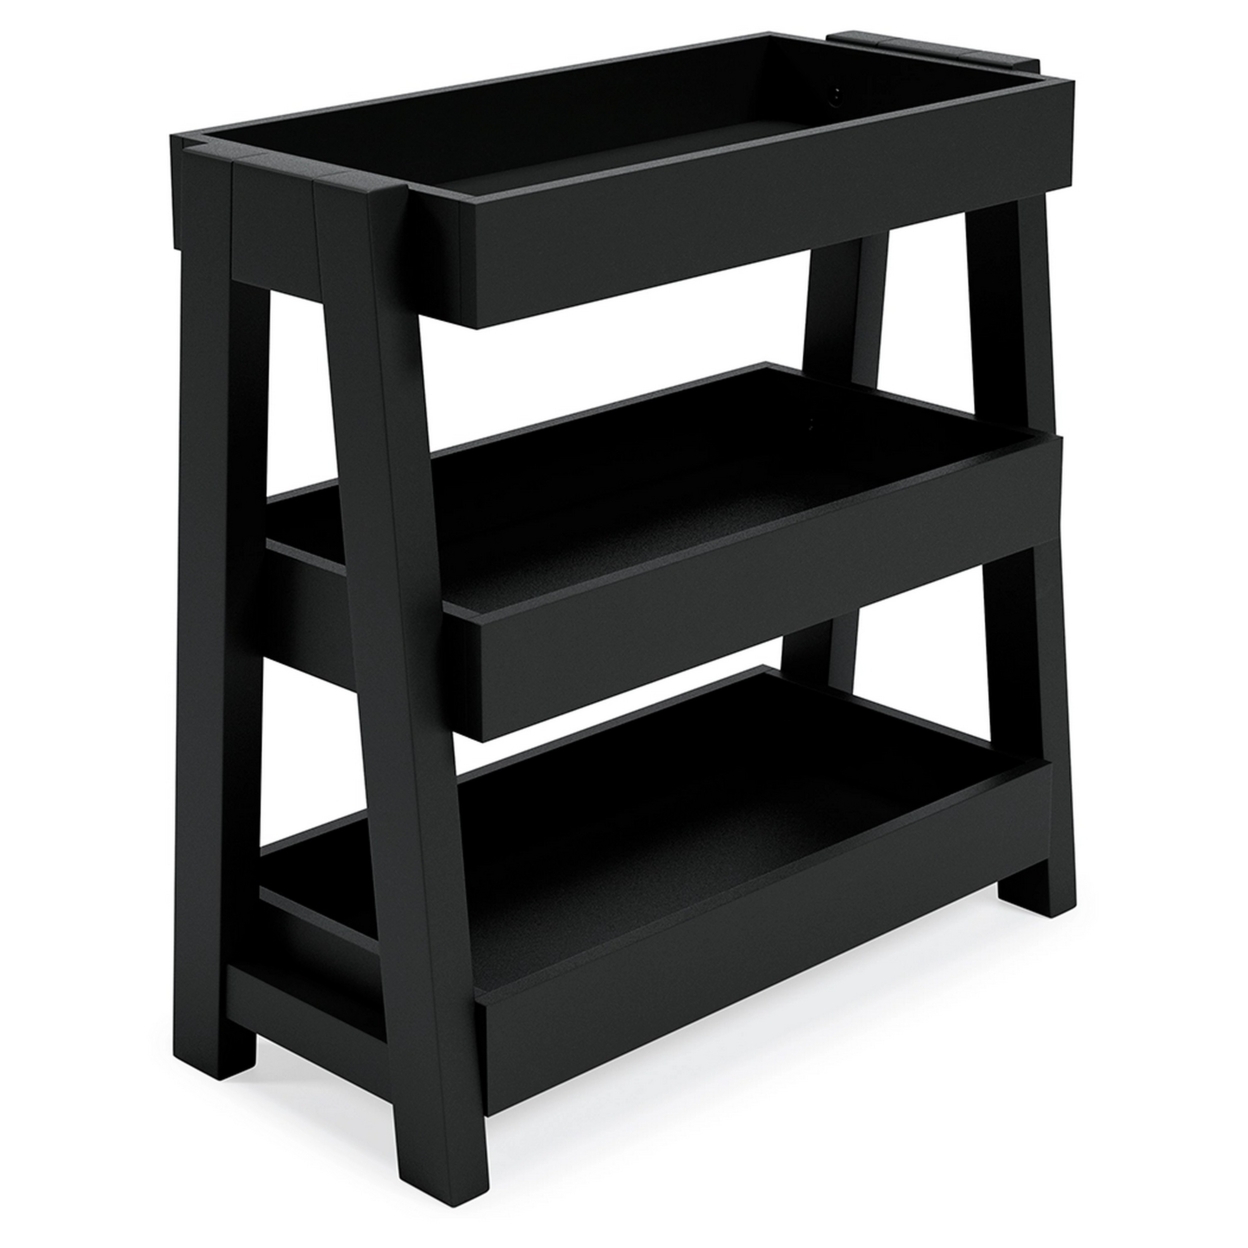 Accent Table With 3 Tier Tray Design Shelves, Black- Saltoro Sherpi